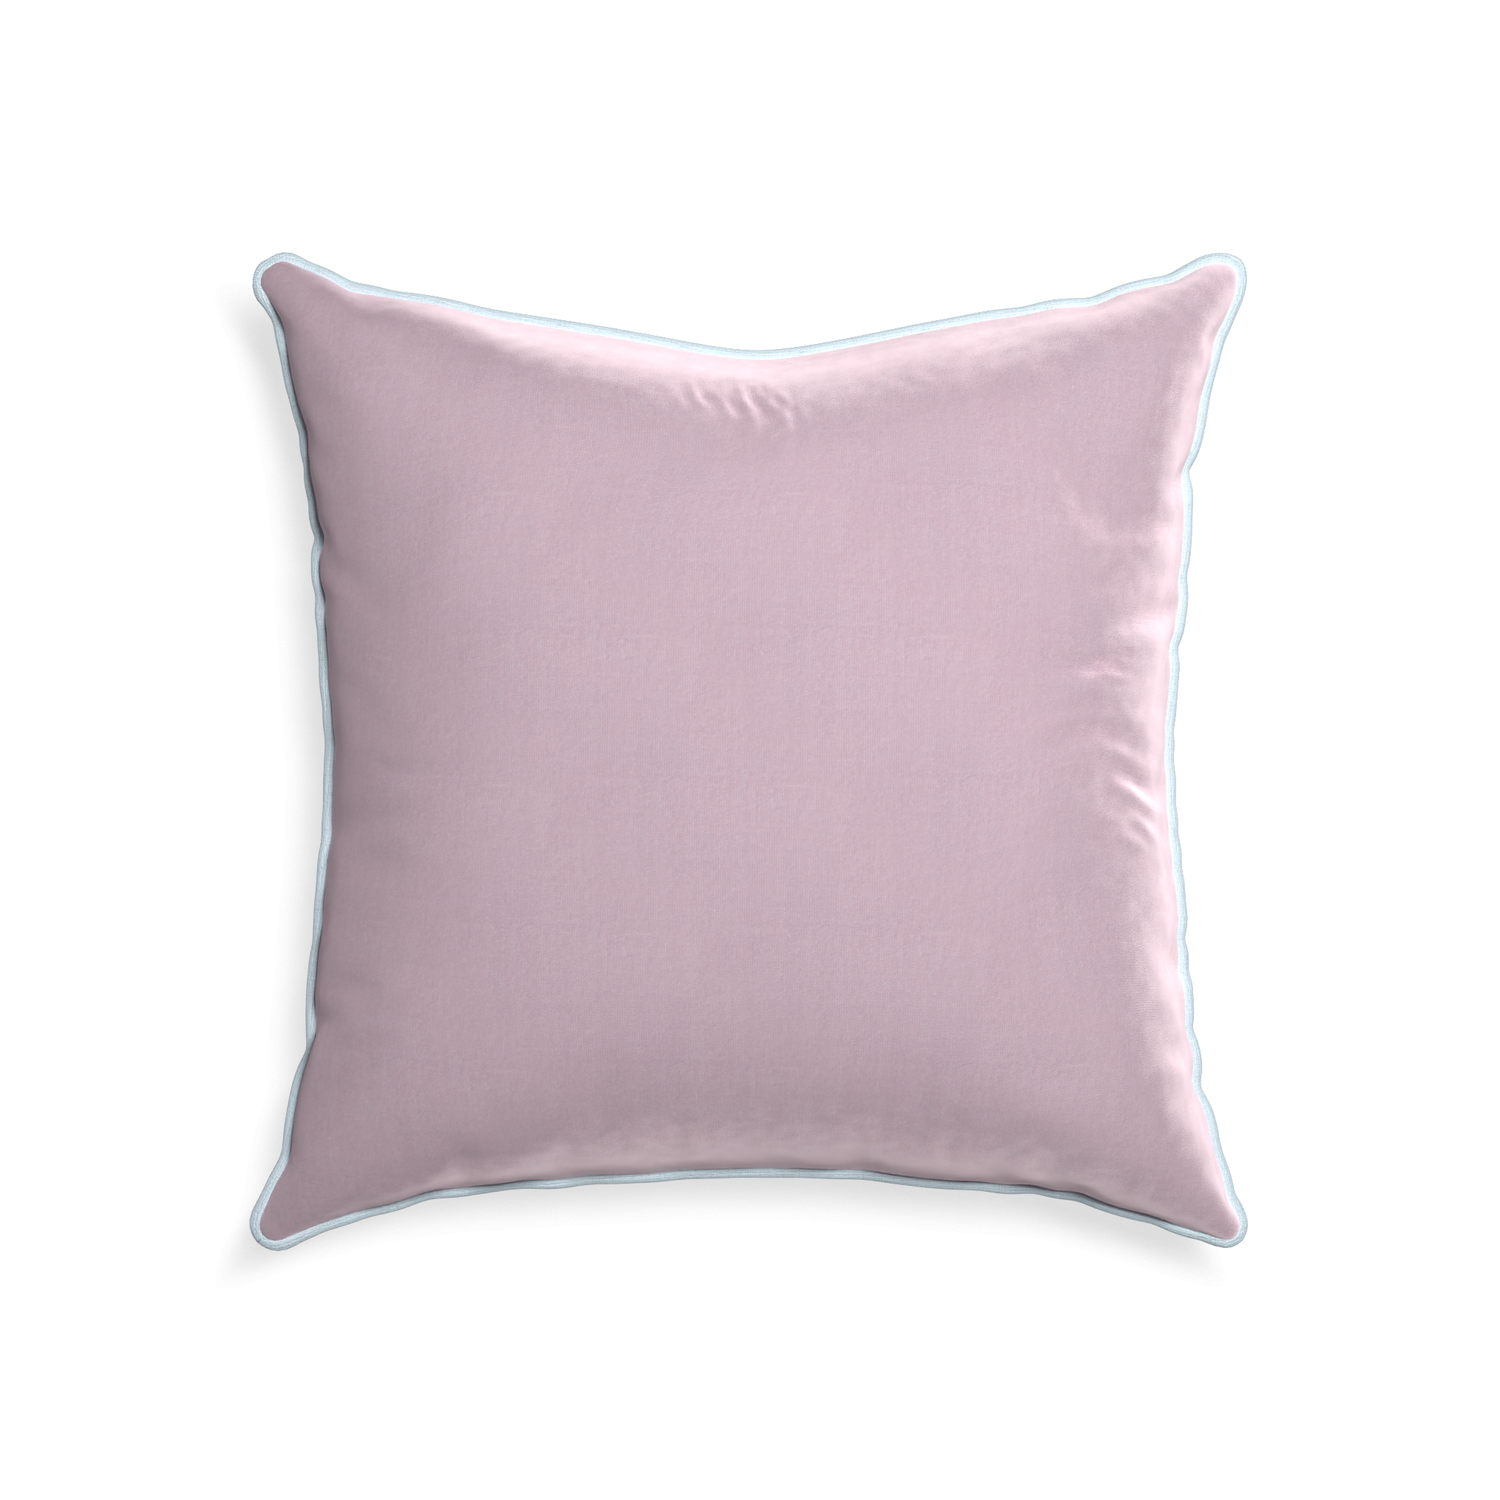 22-square lilac velvet custom lilacpillow with powder piping on white background